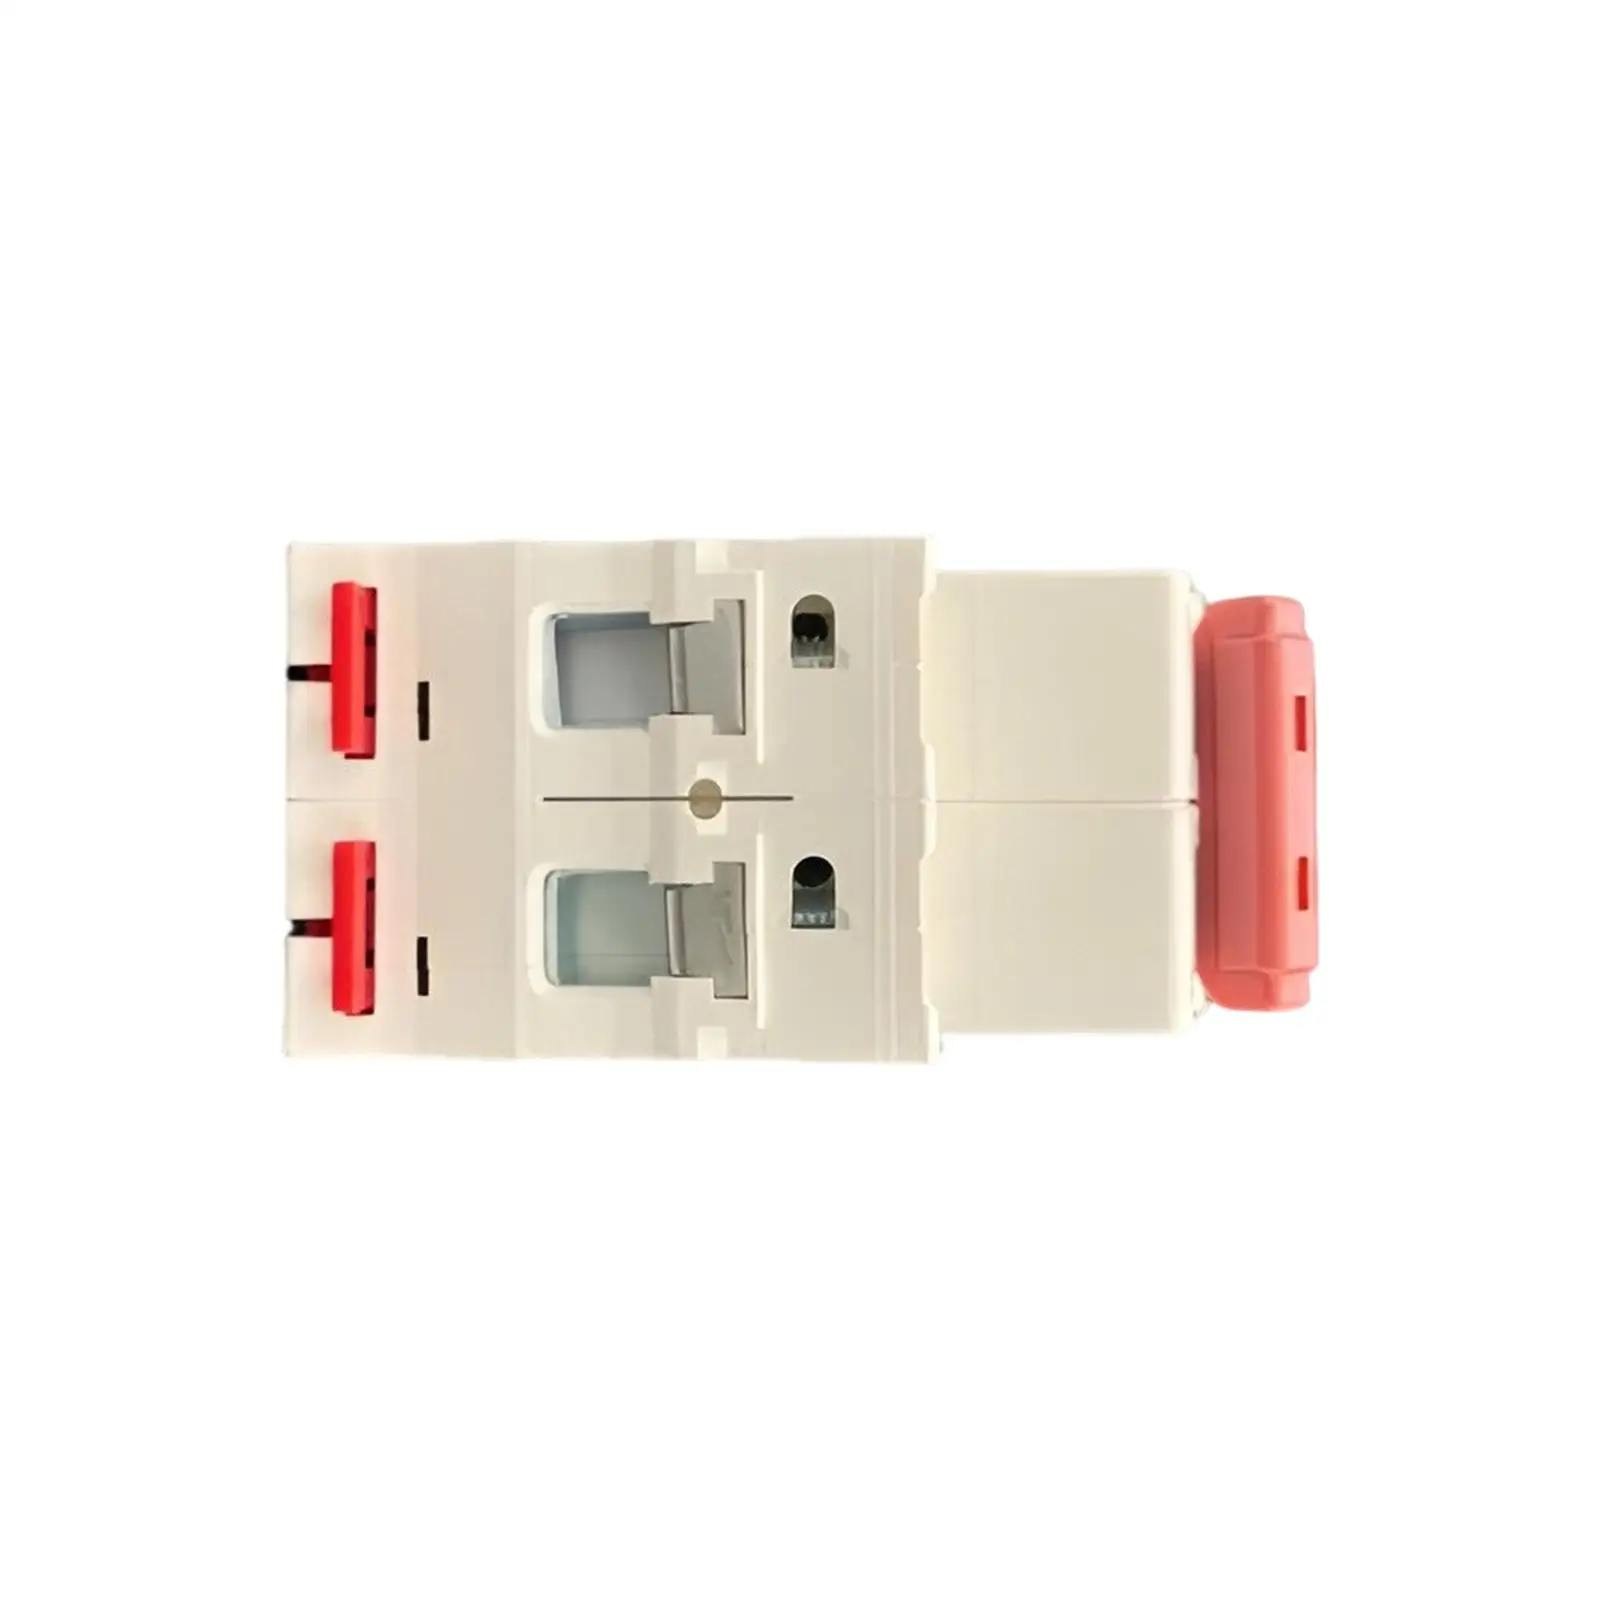 DC Miniature Circuit Breaker for Voltage Equipment, PV Isolator, DC Disconnect Switch